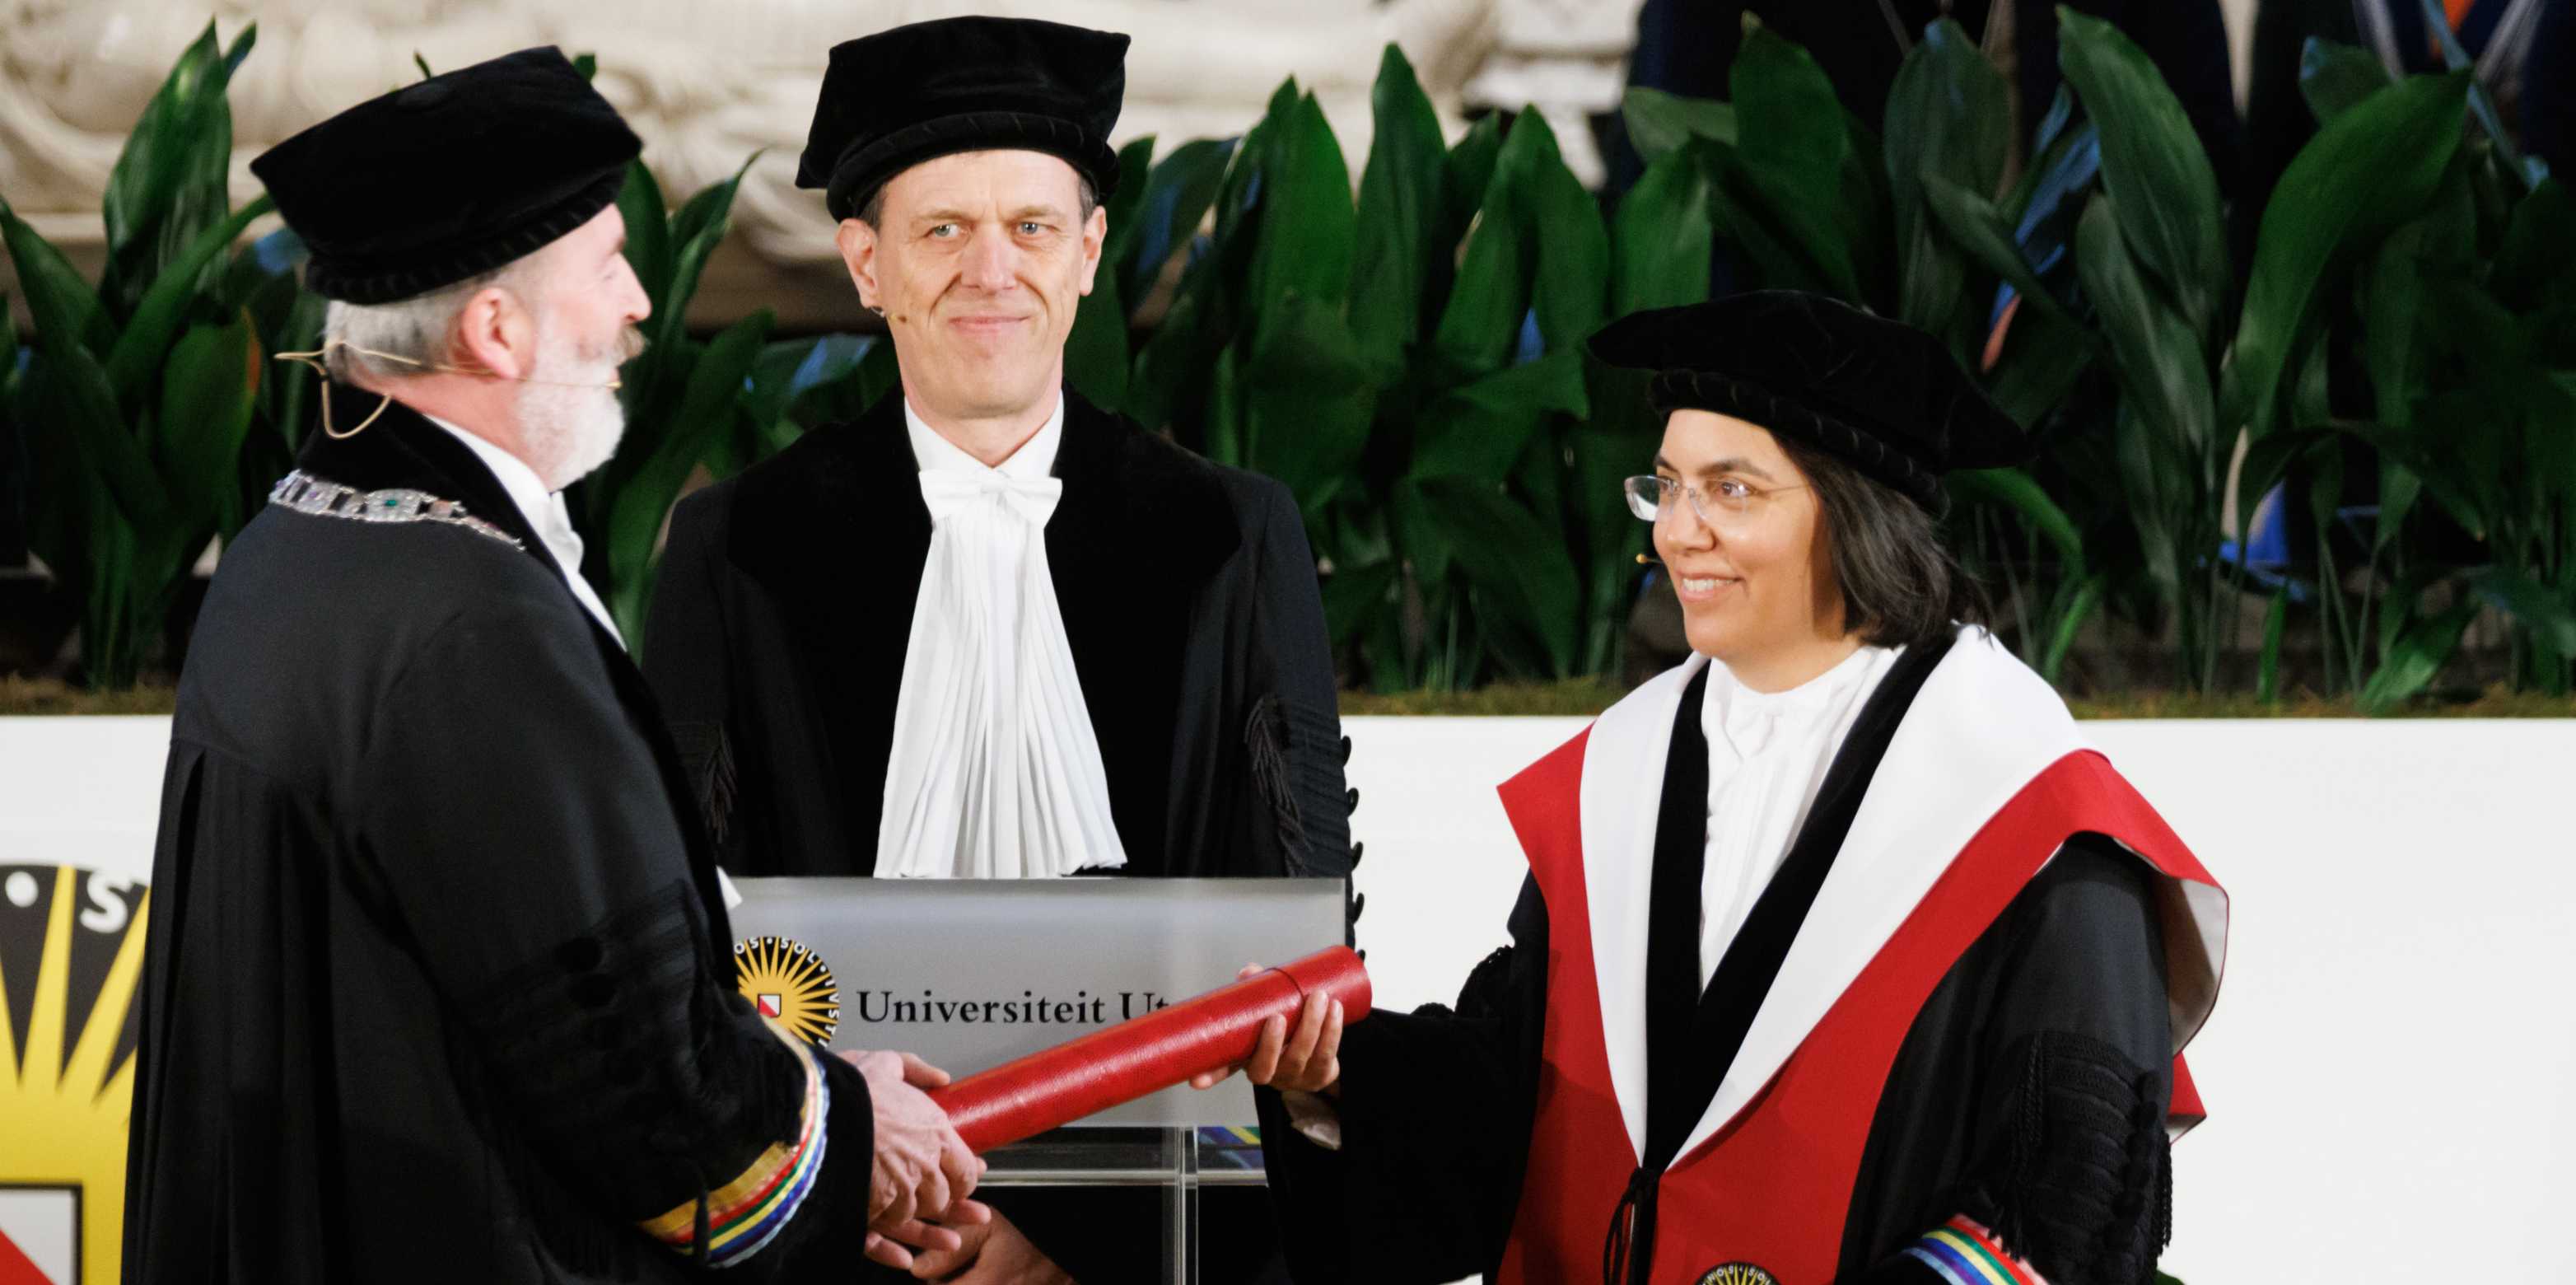 The Utrecht University in the Netherlands has awarded Sonia Seneviratne an honorary doctorate in natural sciences.